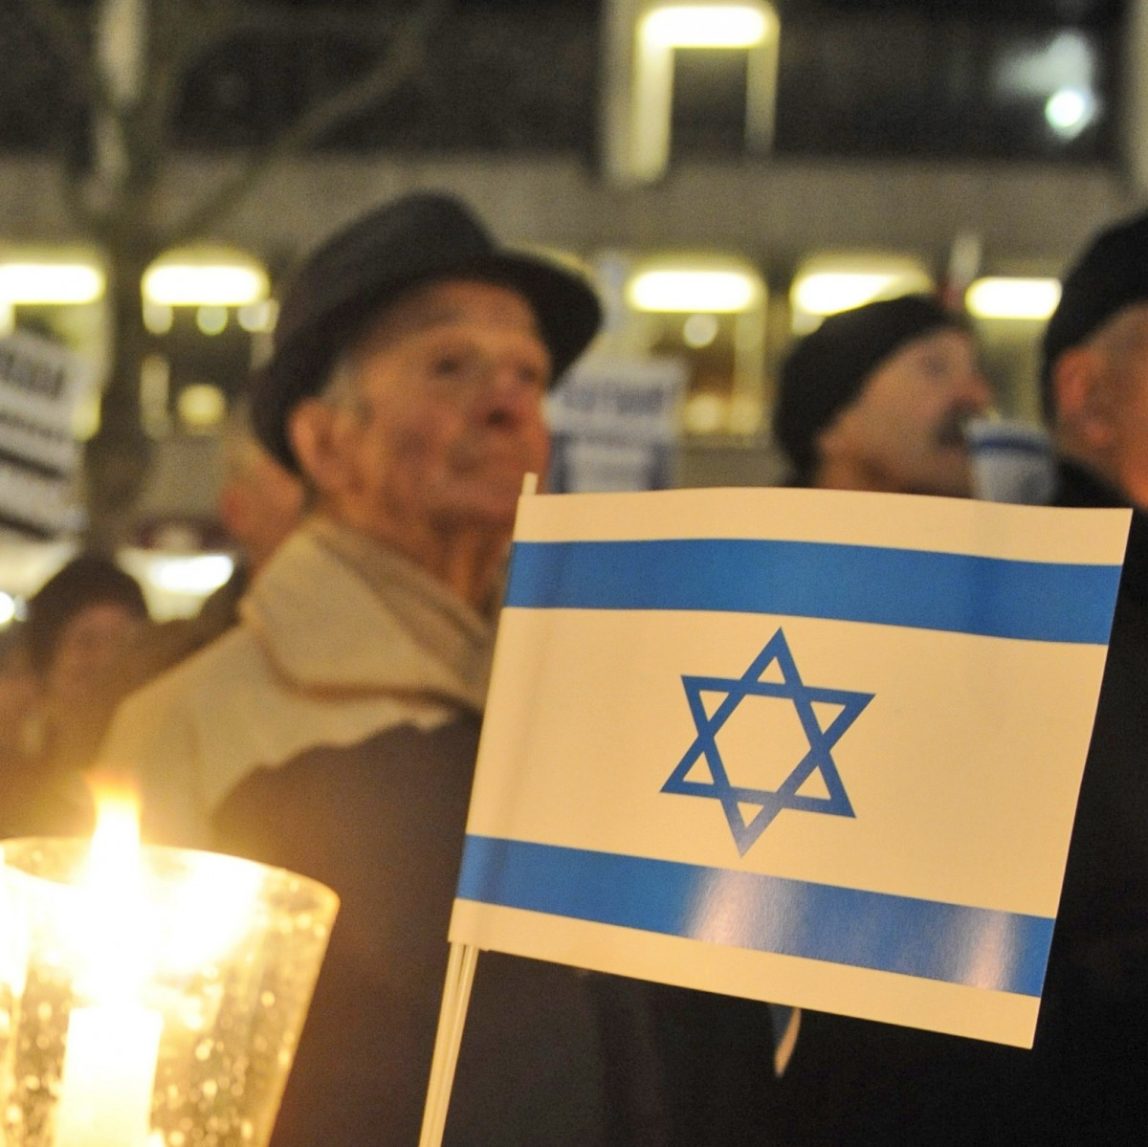 A woman holds a candle and an Israeli flag during a pro-Israel demonstration. (AP Photo/Fabian Bimmer)